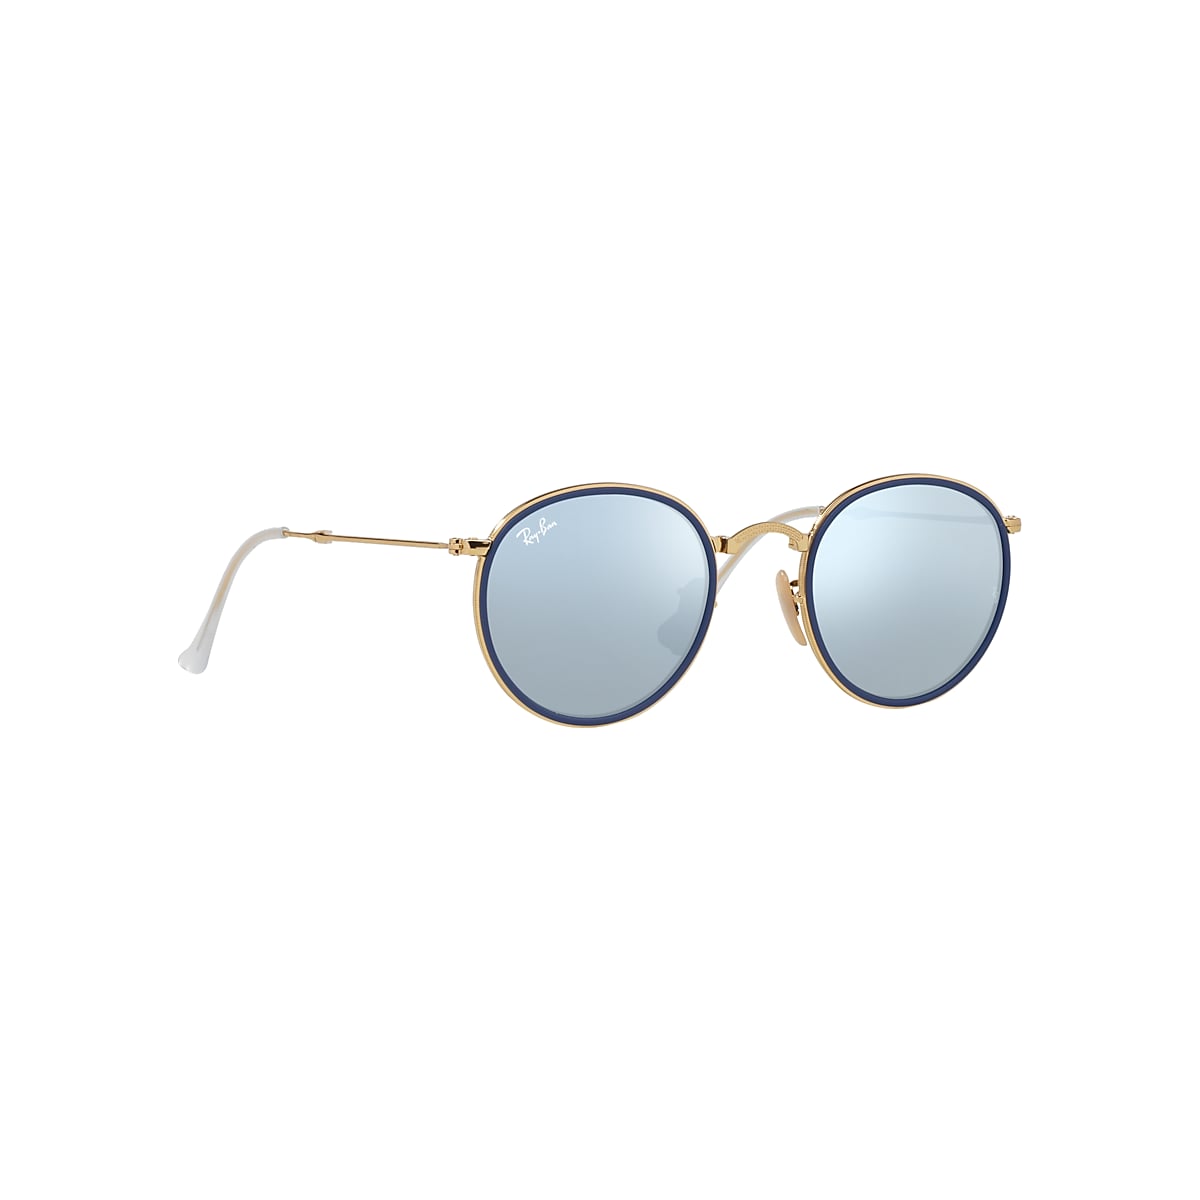 ROUND FOLDING Sunglasses in Gold and Silver RB3517 Ray-Ban® EU